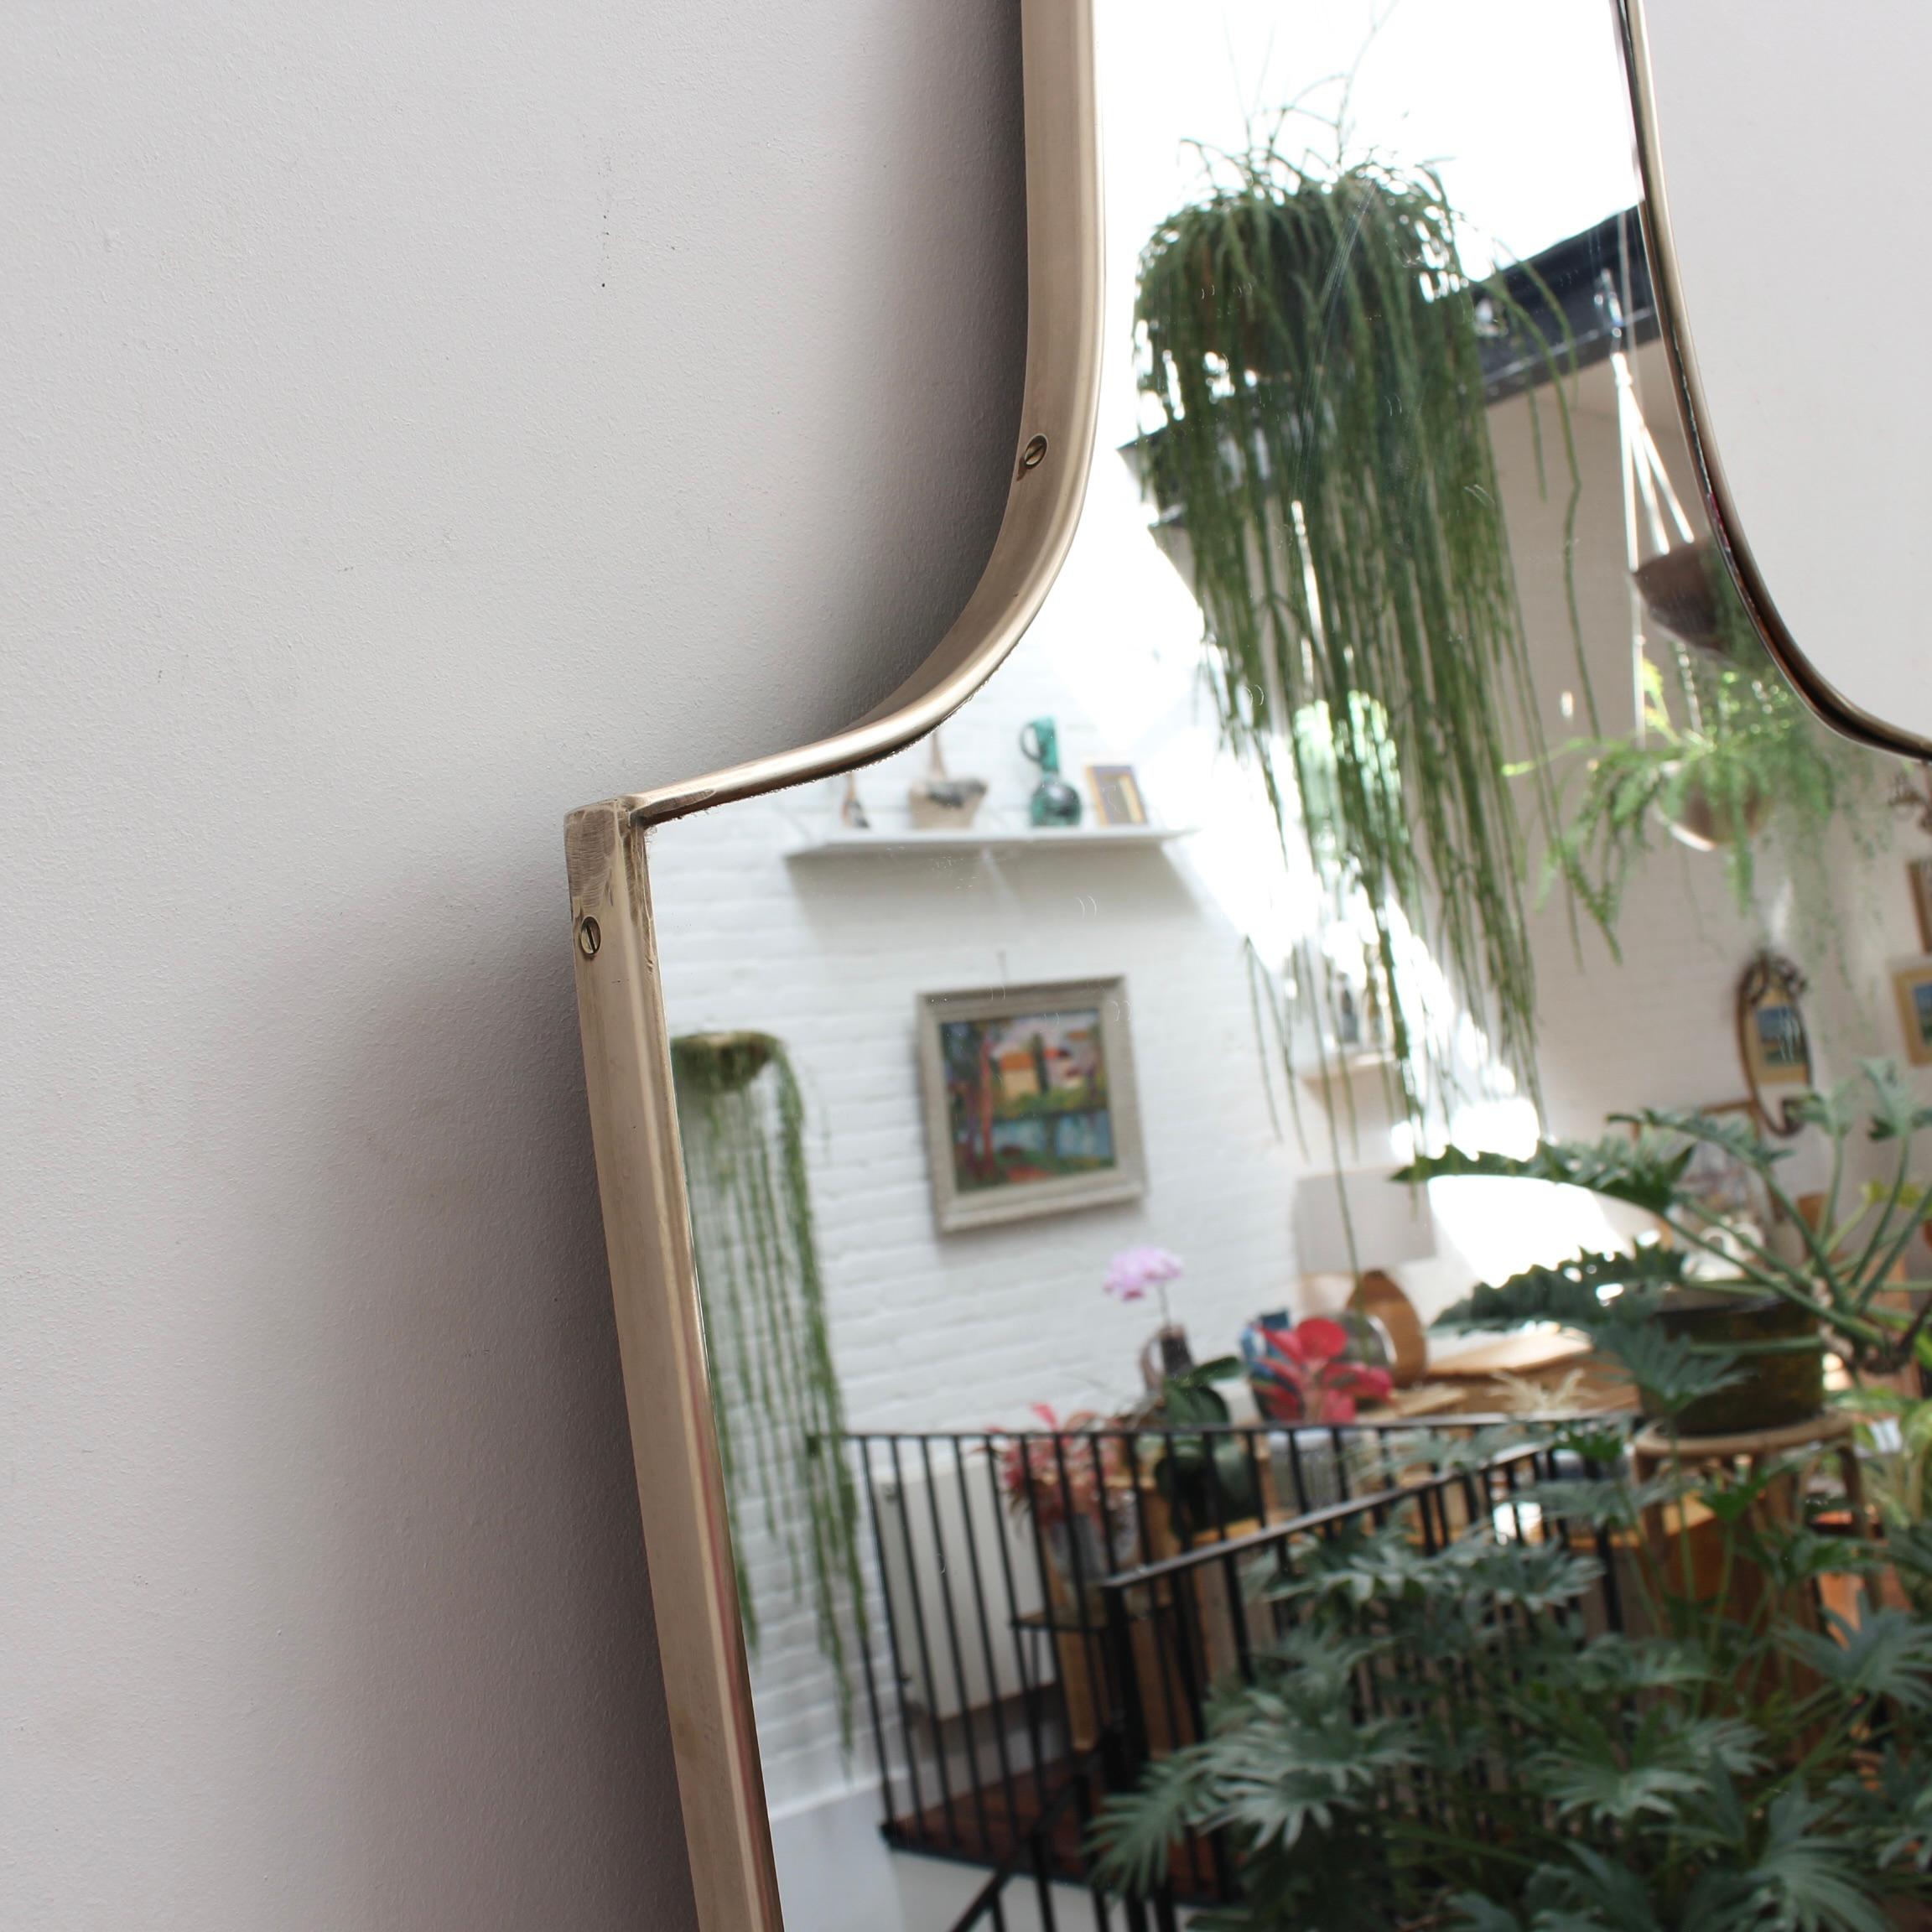 Vintage Italian Wall Mirror with Brass Frame, 'circa 1950s', Large In Good Condition For Sale In London, GB